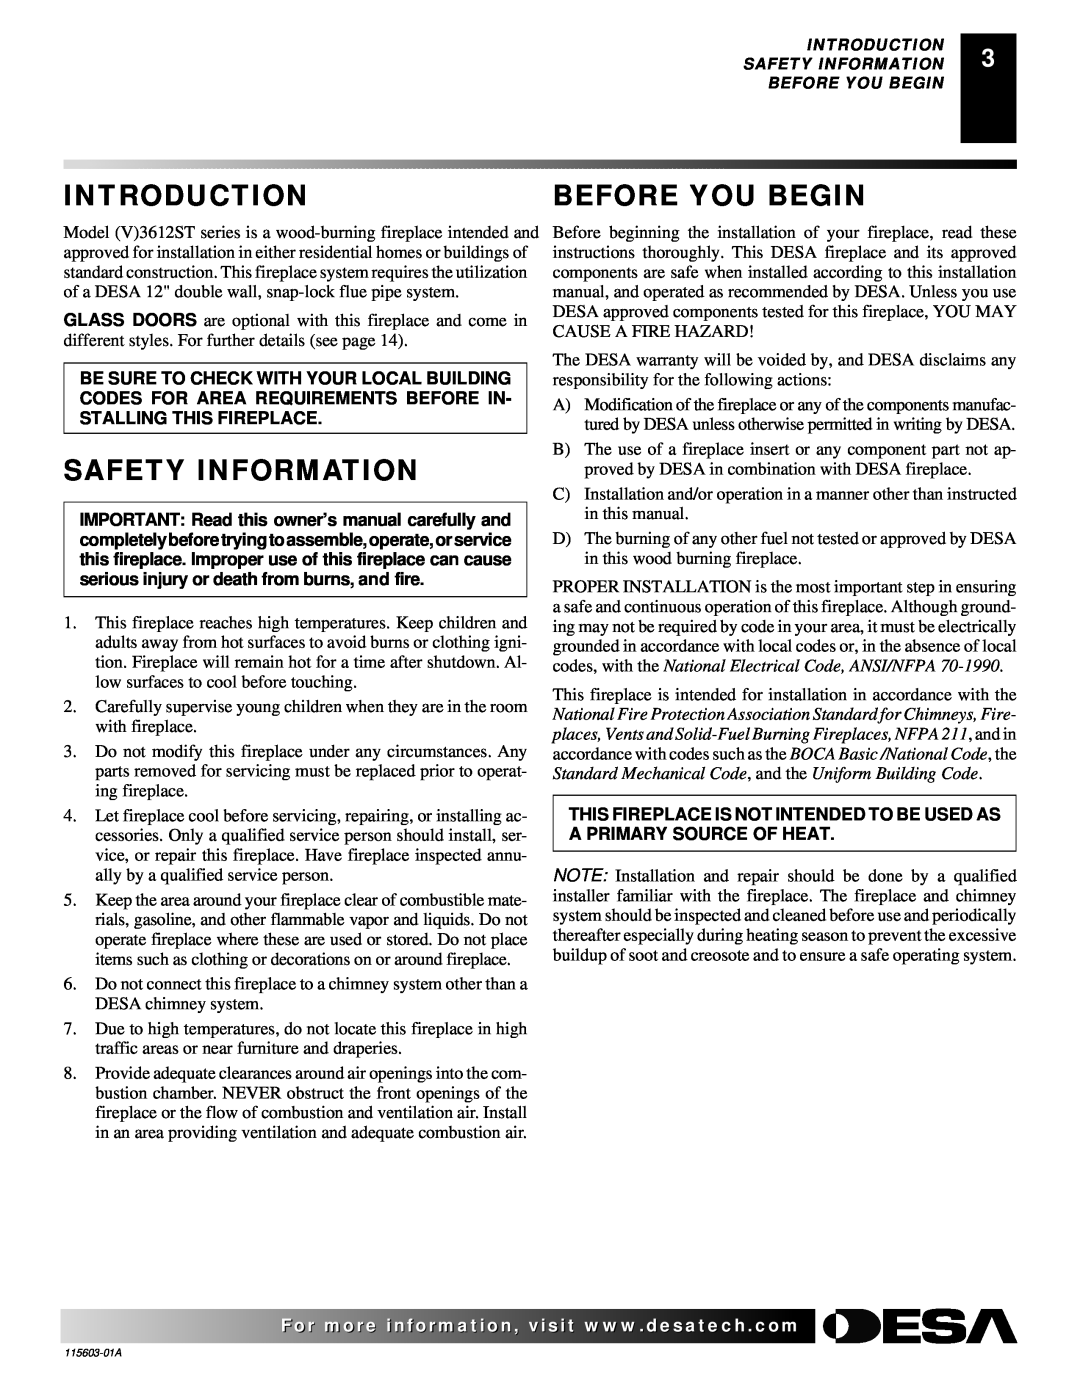 Desa (V)3612ST operating instructions Introduction, Before You Begin, Safety Information 